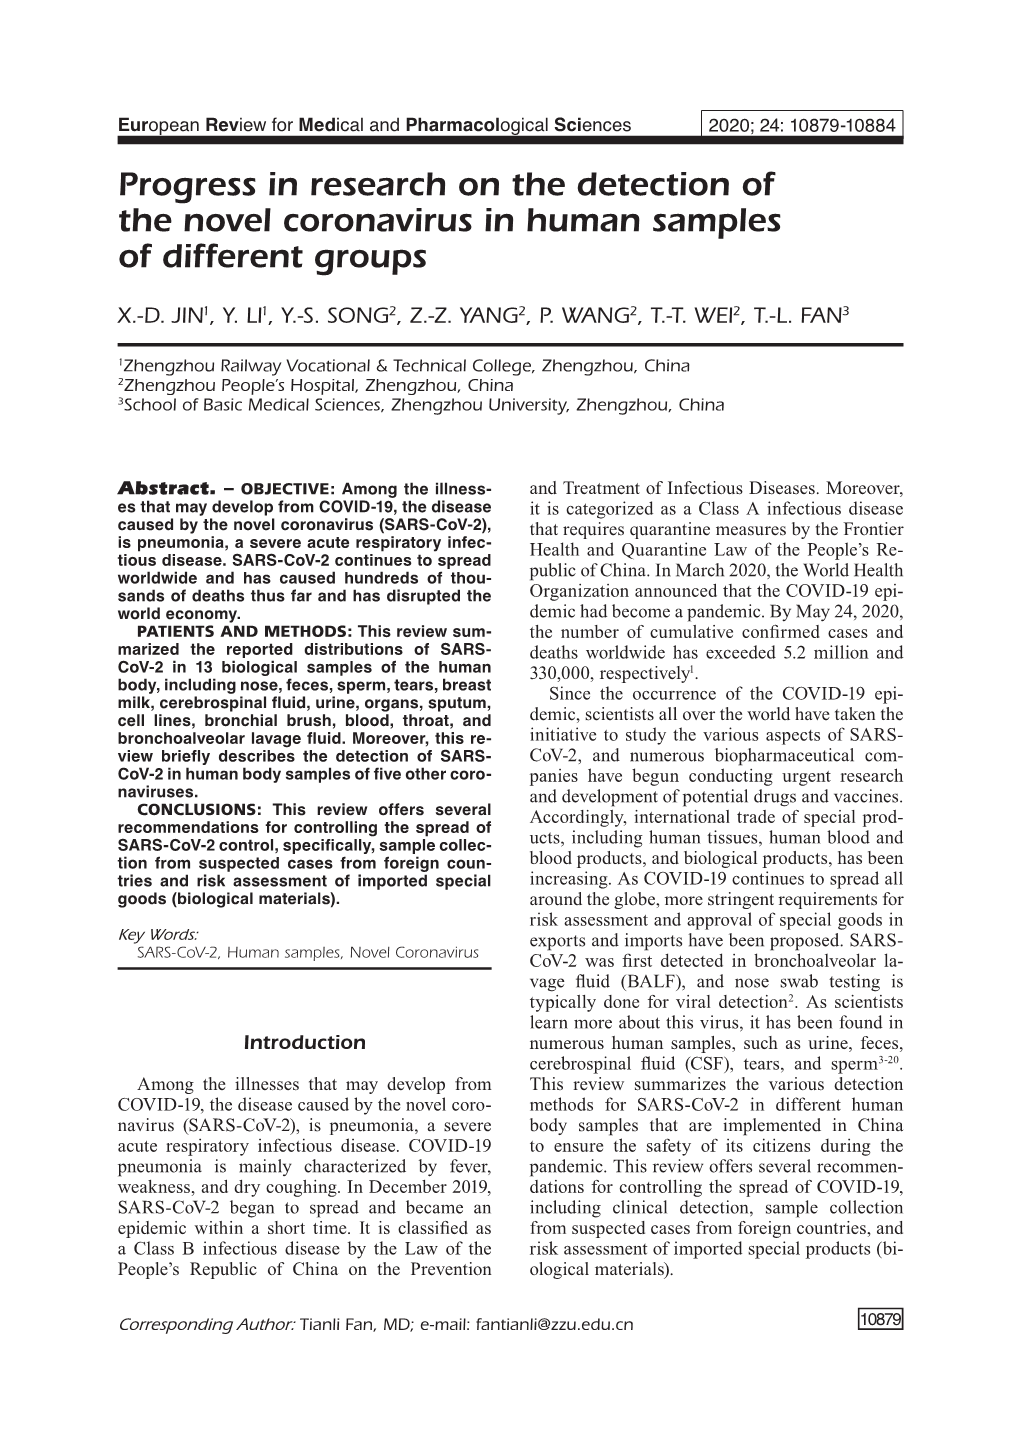 Progress in Research on the Detection of the Novel Coronavirus in Human Samples of Different Groups